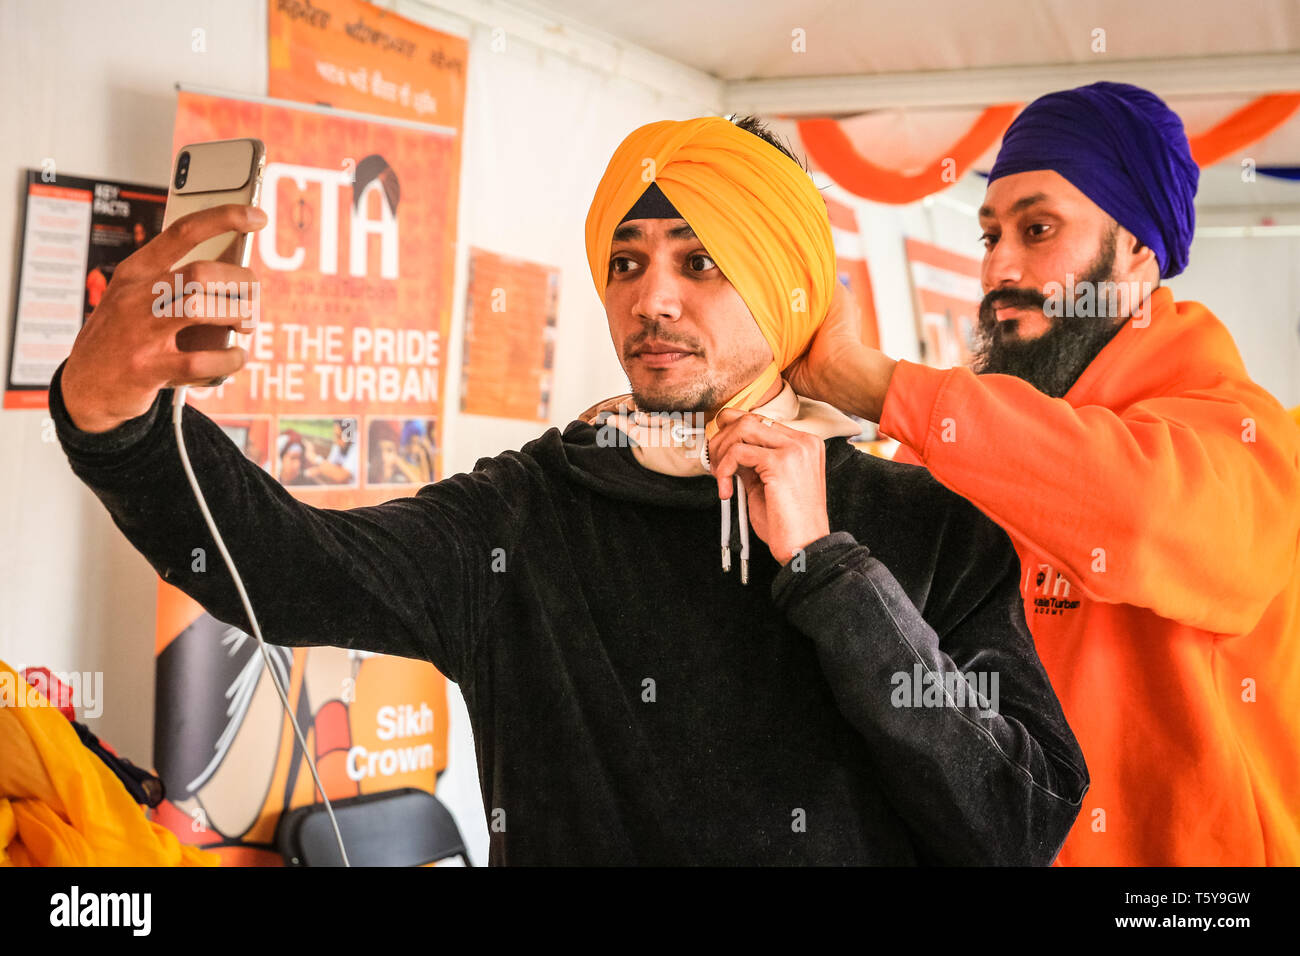 Trafalgar Square, London, UK, 27th April 2019. A turban tying demonstration. Vaisakhi Festival, a celebration of Sikh culture and heritage is once again brought back to Trafalgar Square. Highlights include colourful stage performances of kirtan and dharmic music, as well as food and cooking demonstrations. Credit: Imageplotter/Alamy Live News Stock Photo